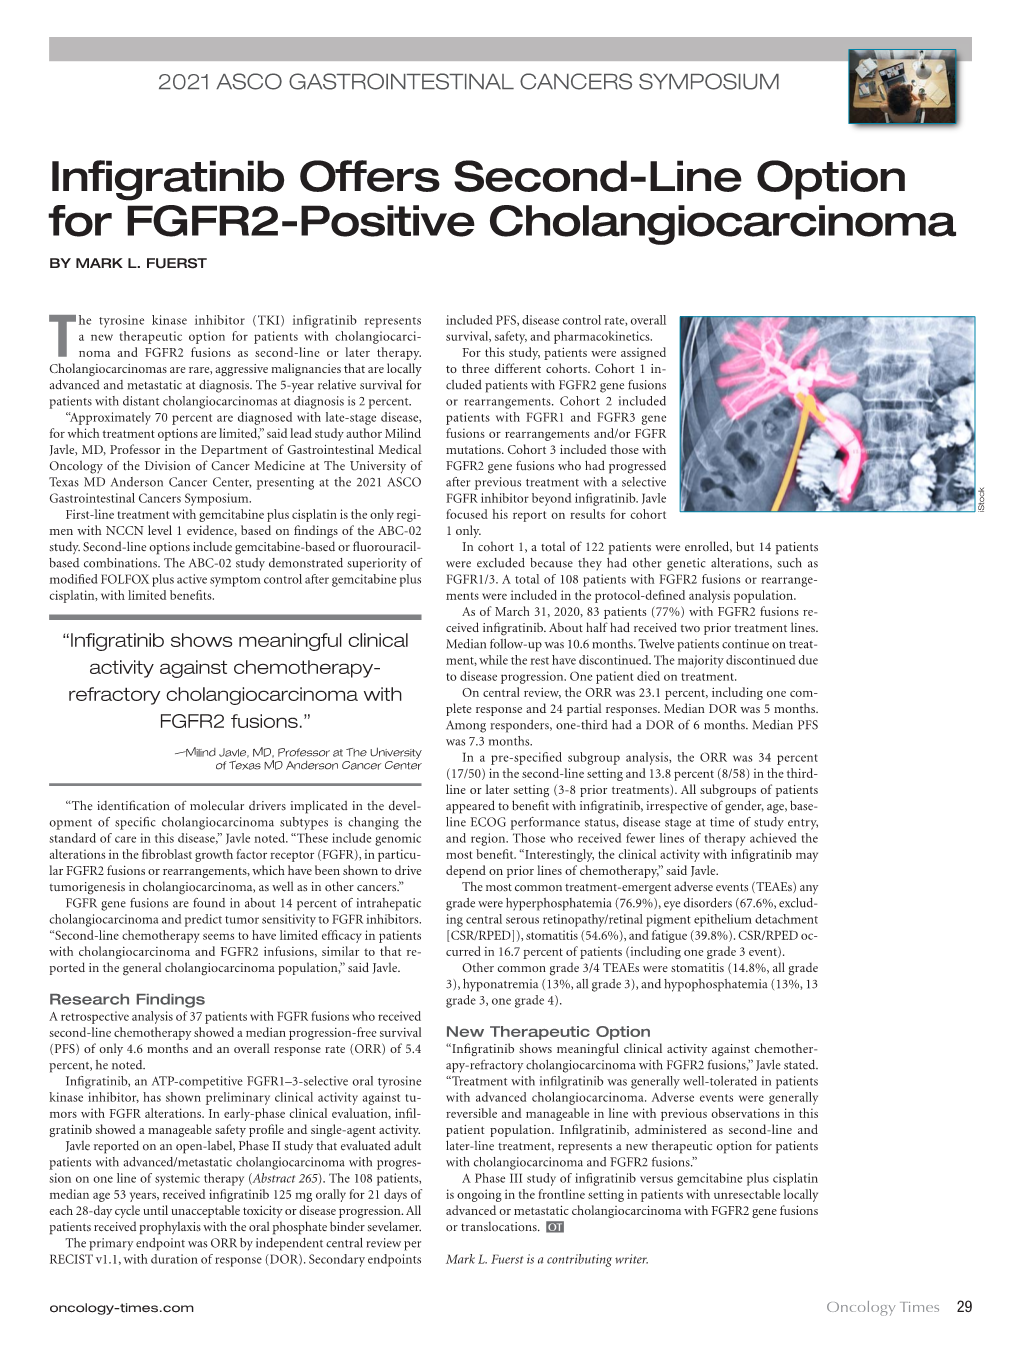 Infigratinib Offers Second-Line Option for FGFR2-Positive Cholangiocarcinoma by Mark L